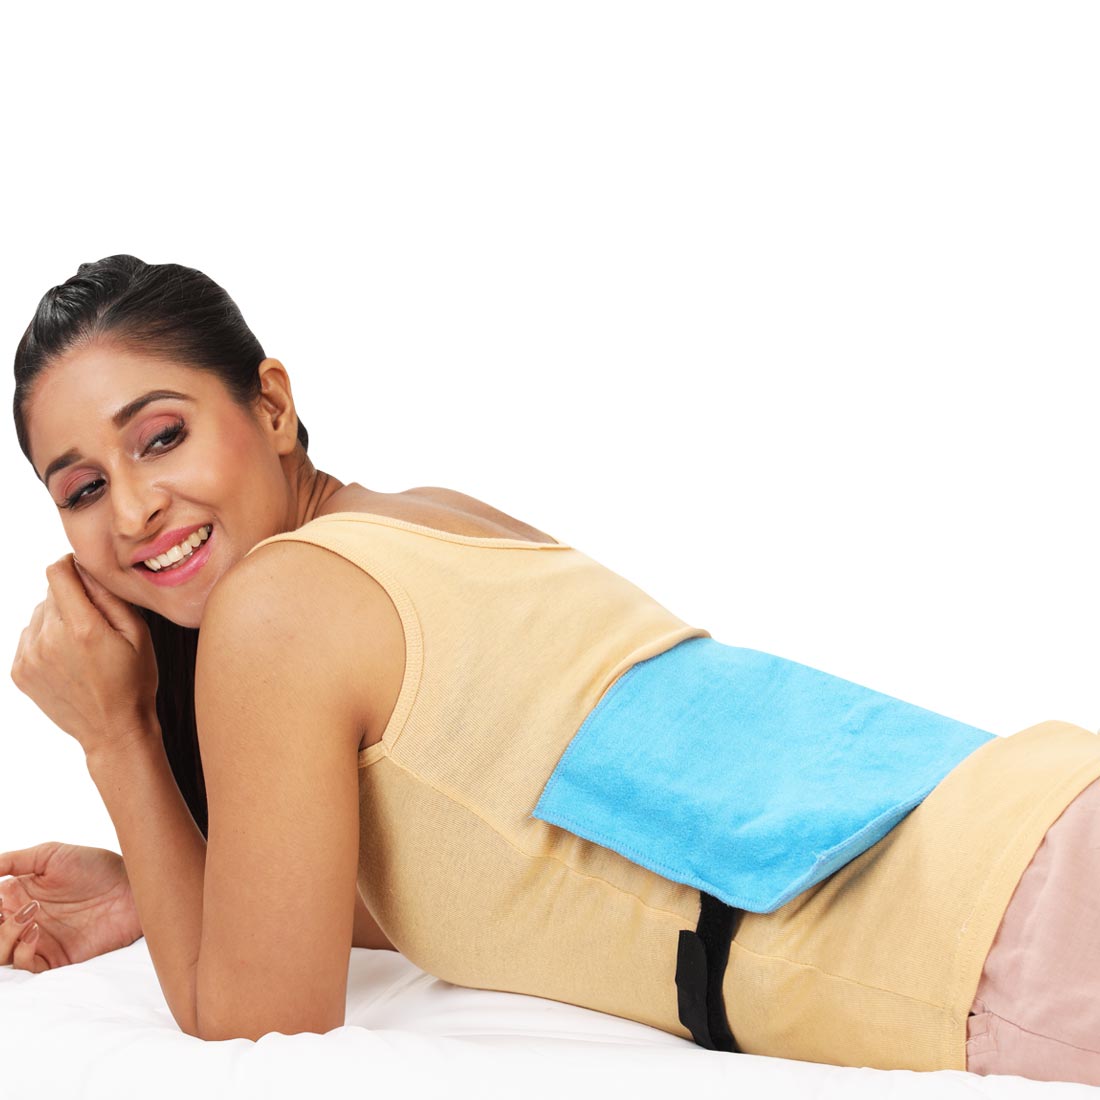 Are electric heating pads good for you?